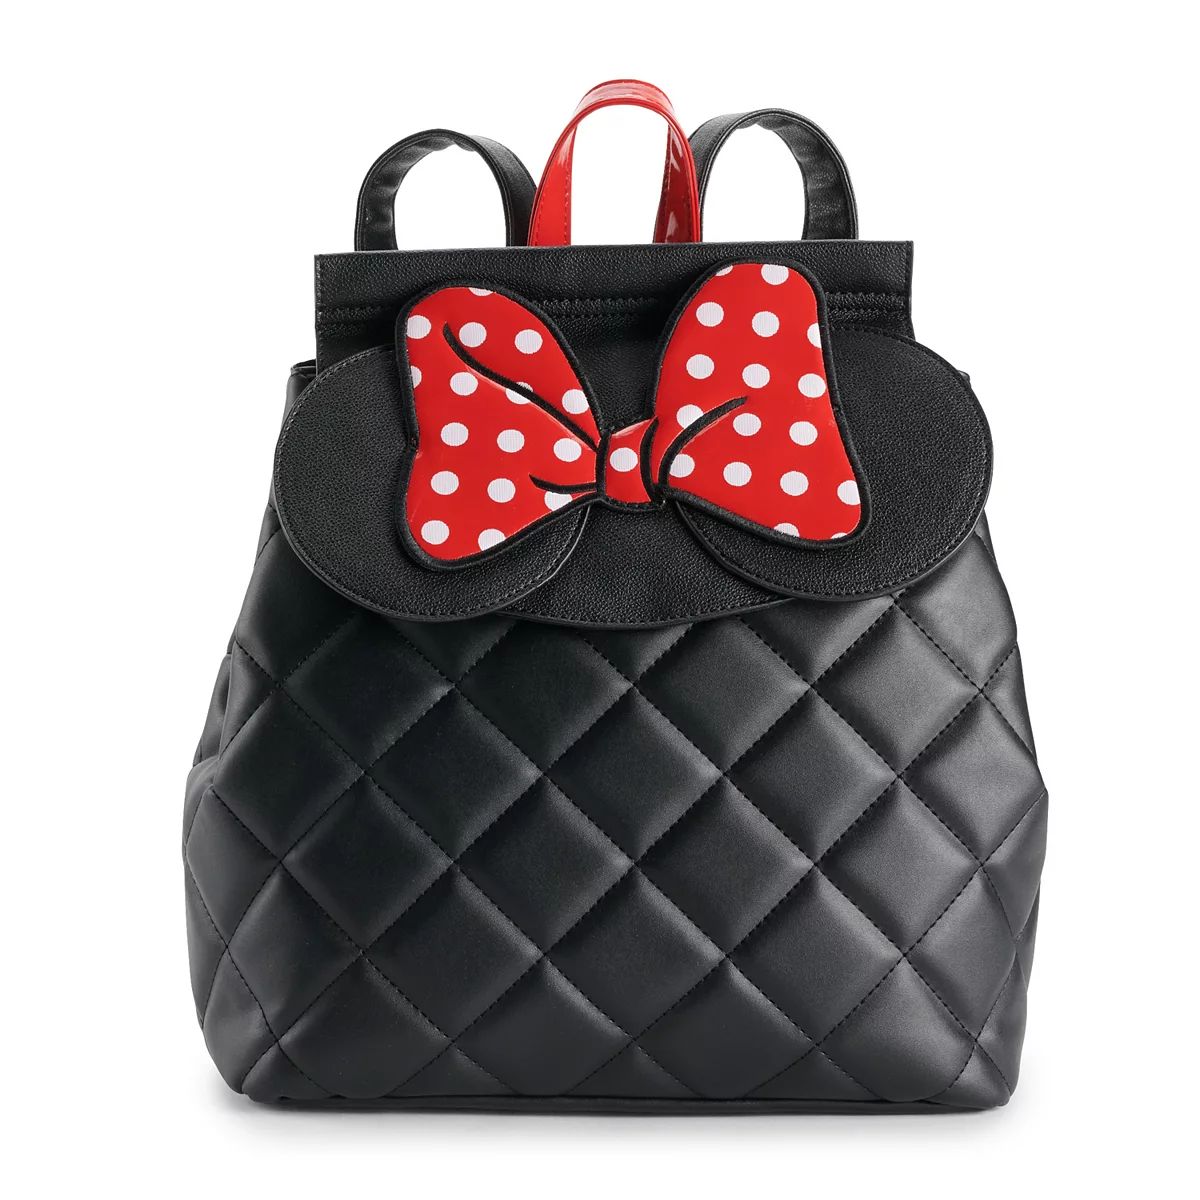 Danielle Nicole Disney's Minnie Mouse Red Bow Backpack | Kohl's